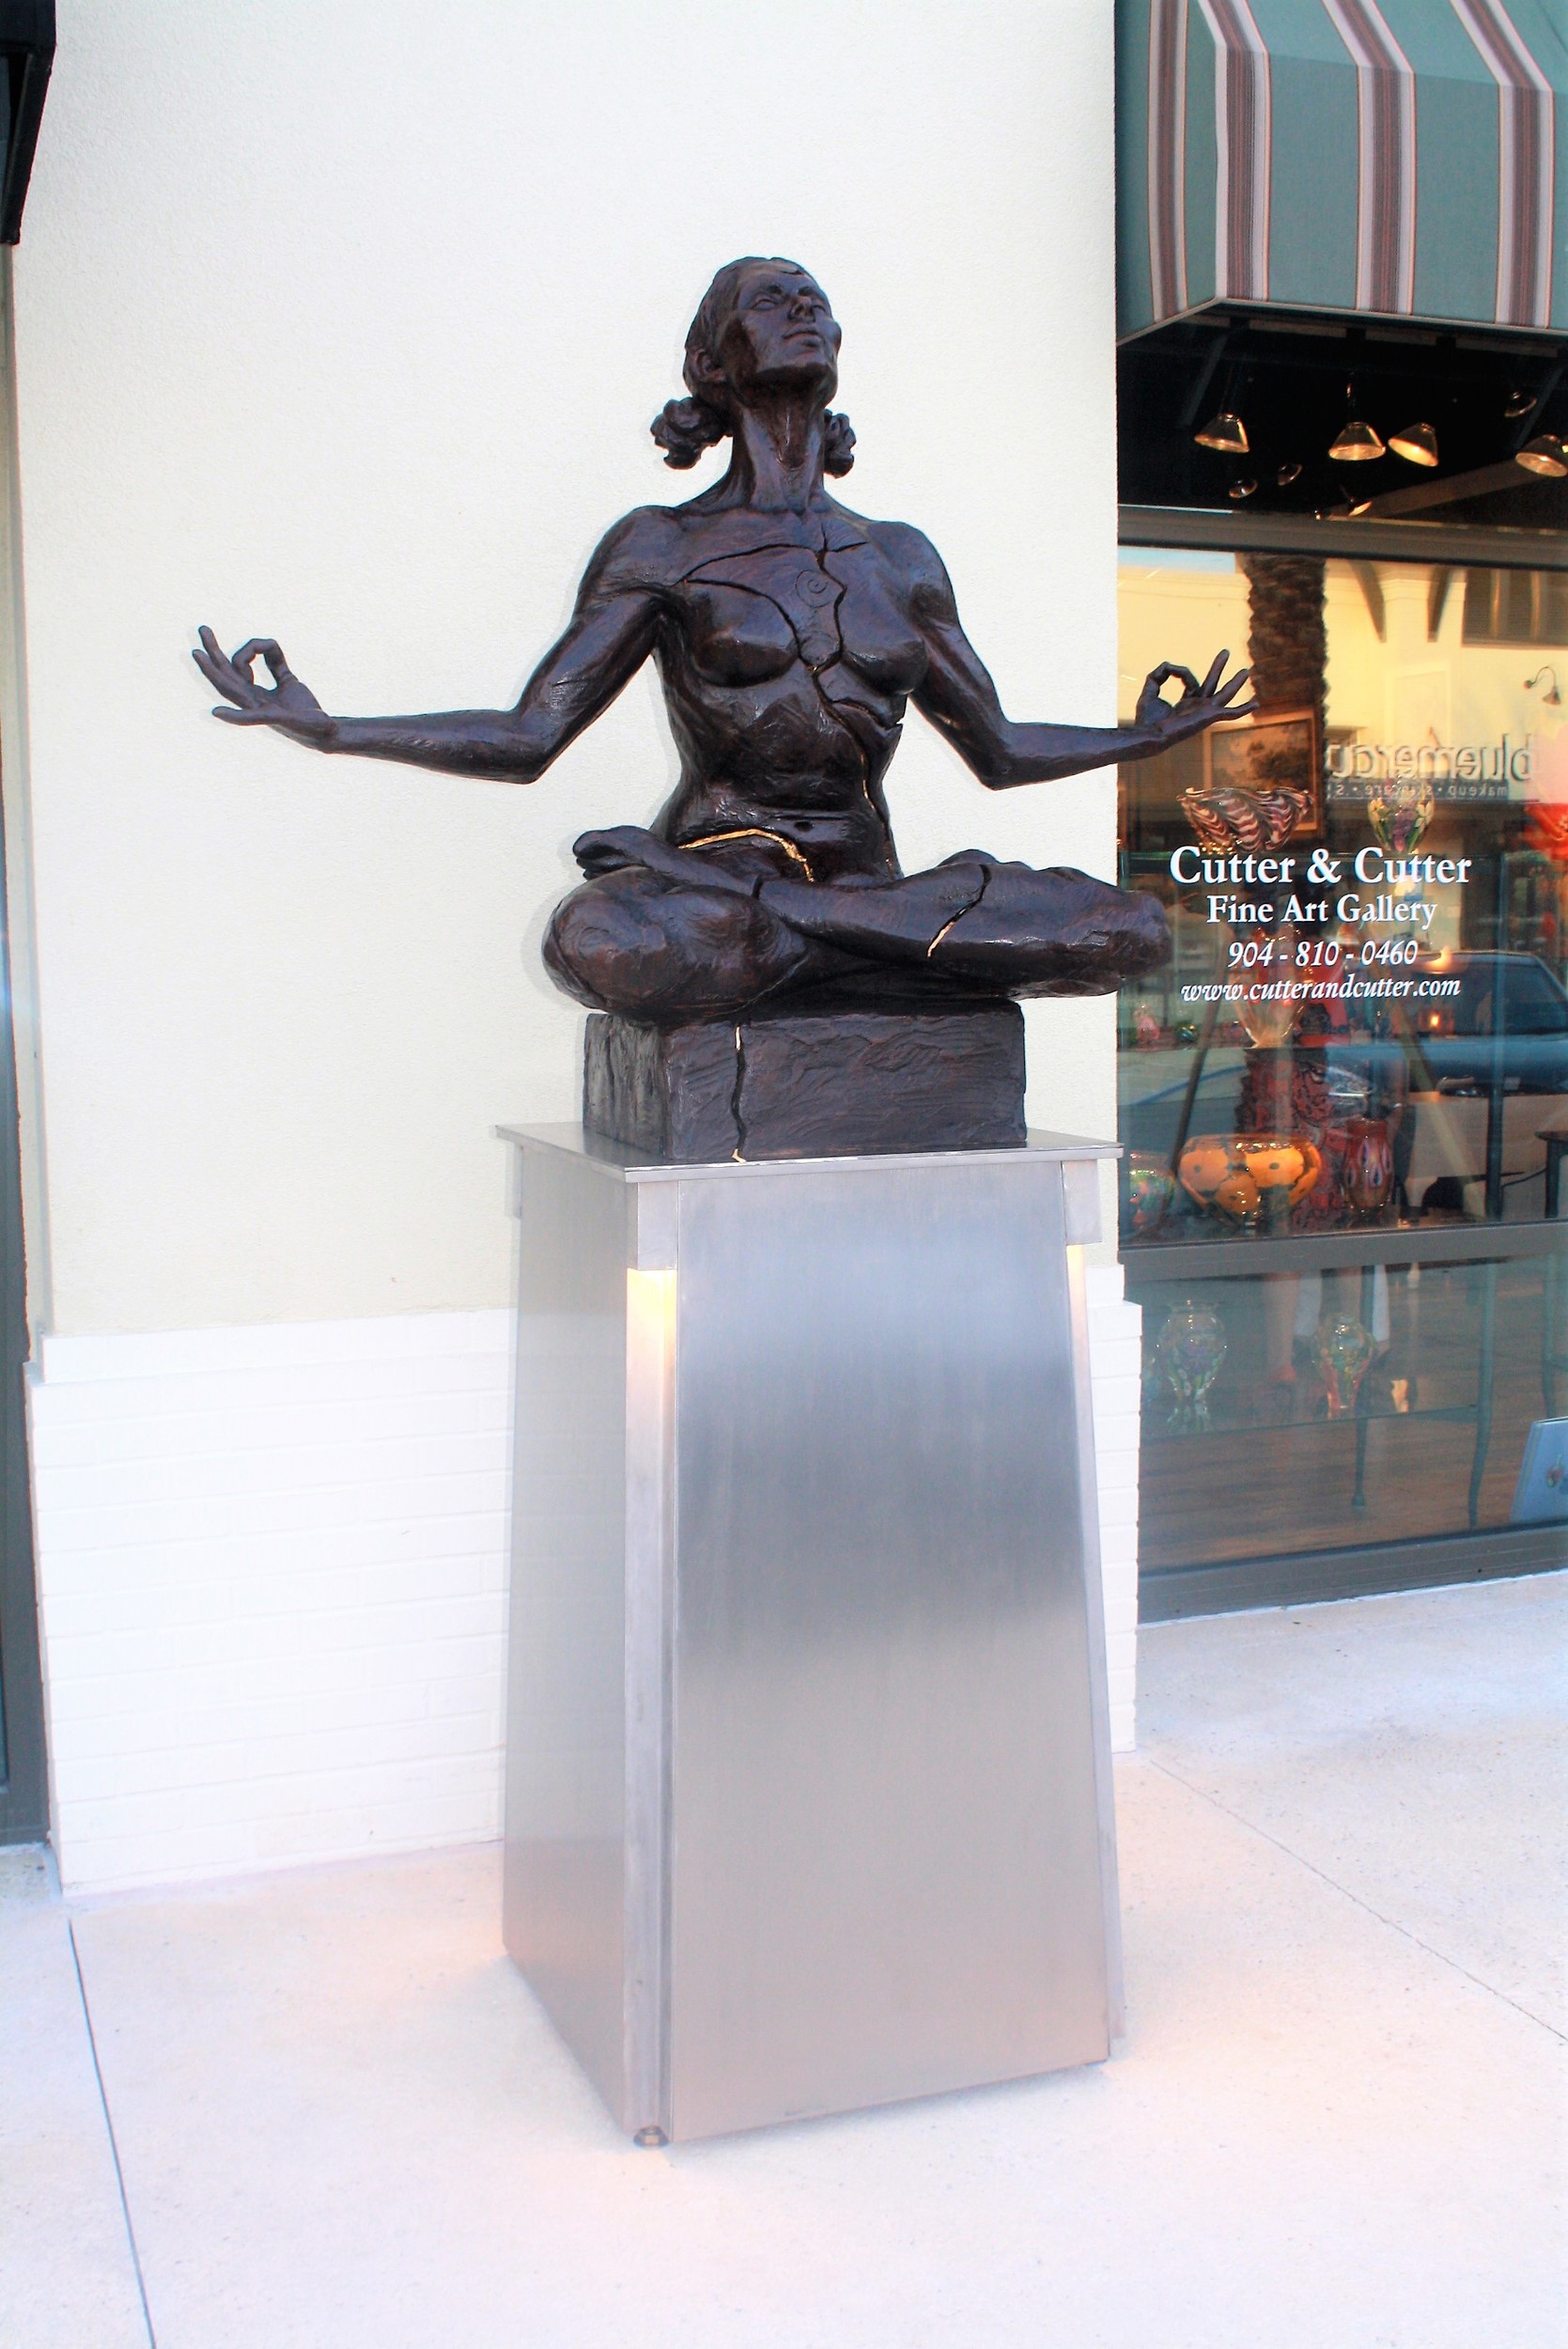 Cutter & Cutter has installed a Paige Bradley sculpture in front of its Sawgrass Village shop